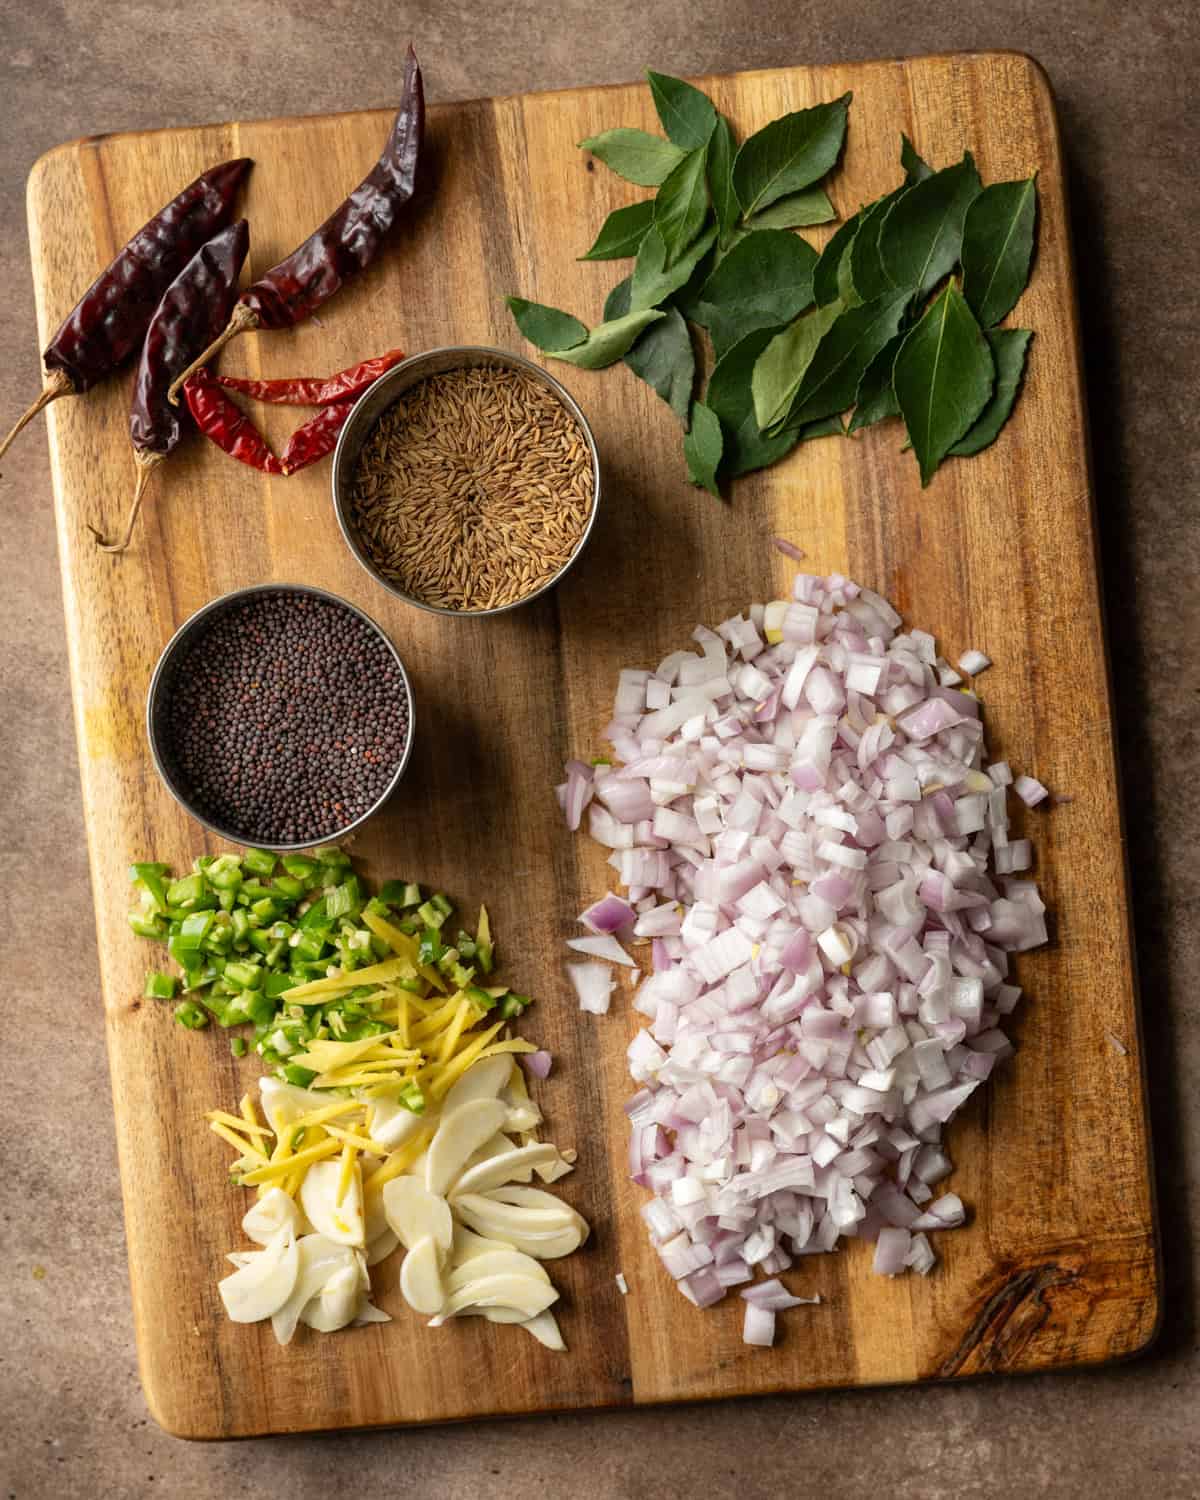 Tadka ingredients chopped and in small bowls on cutting board.